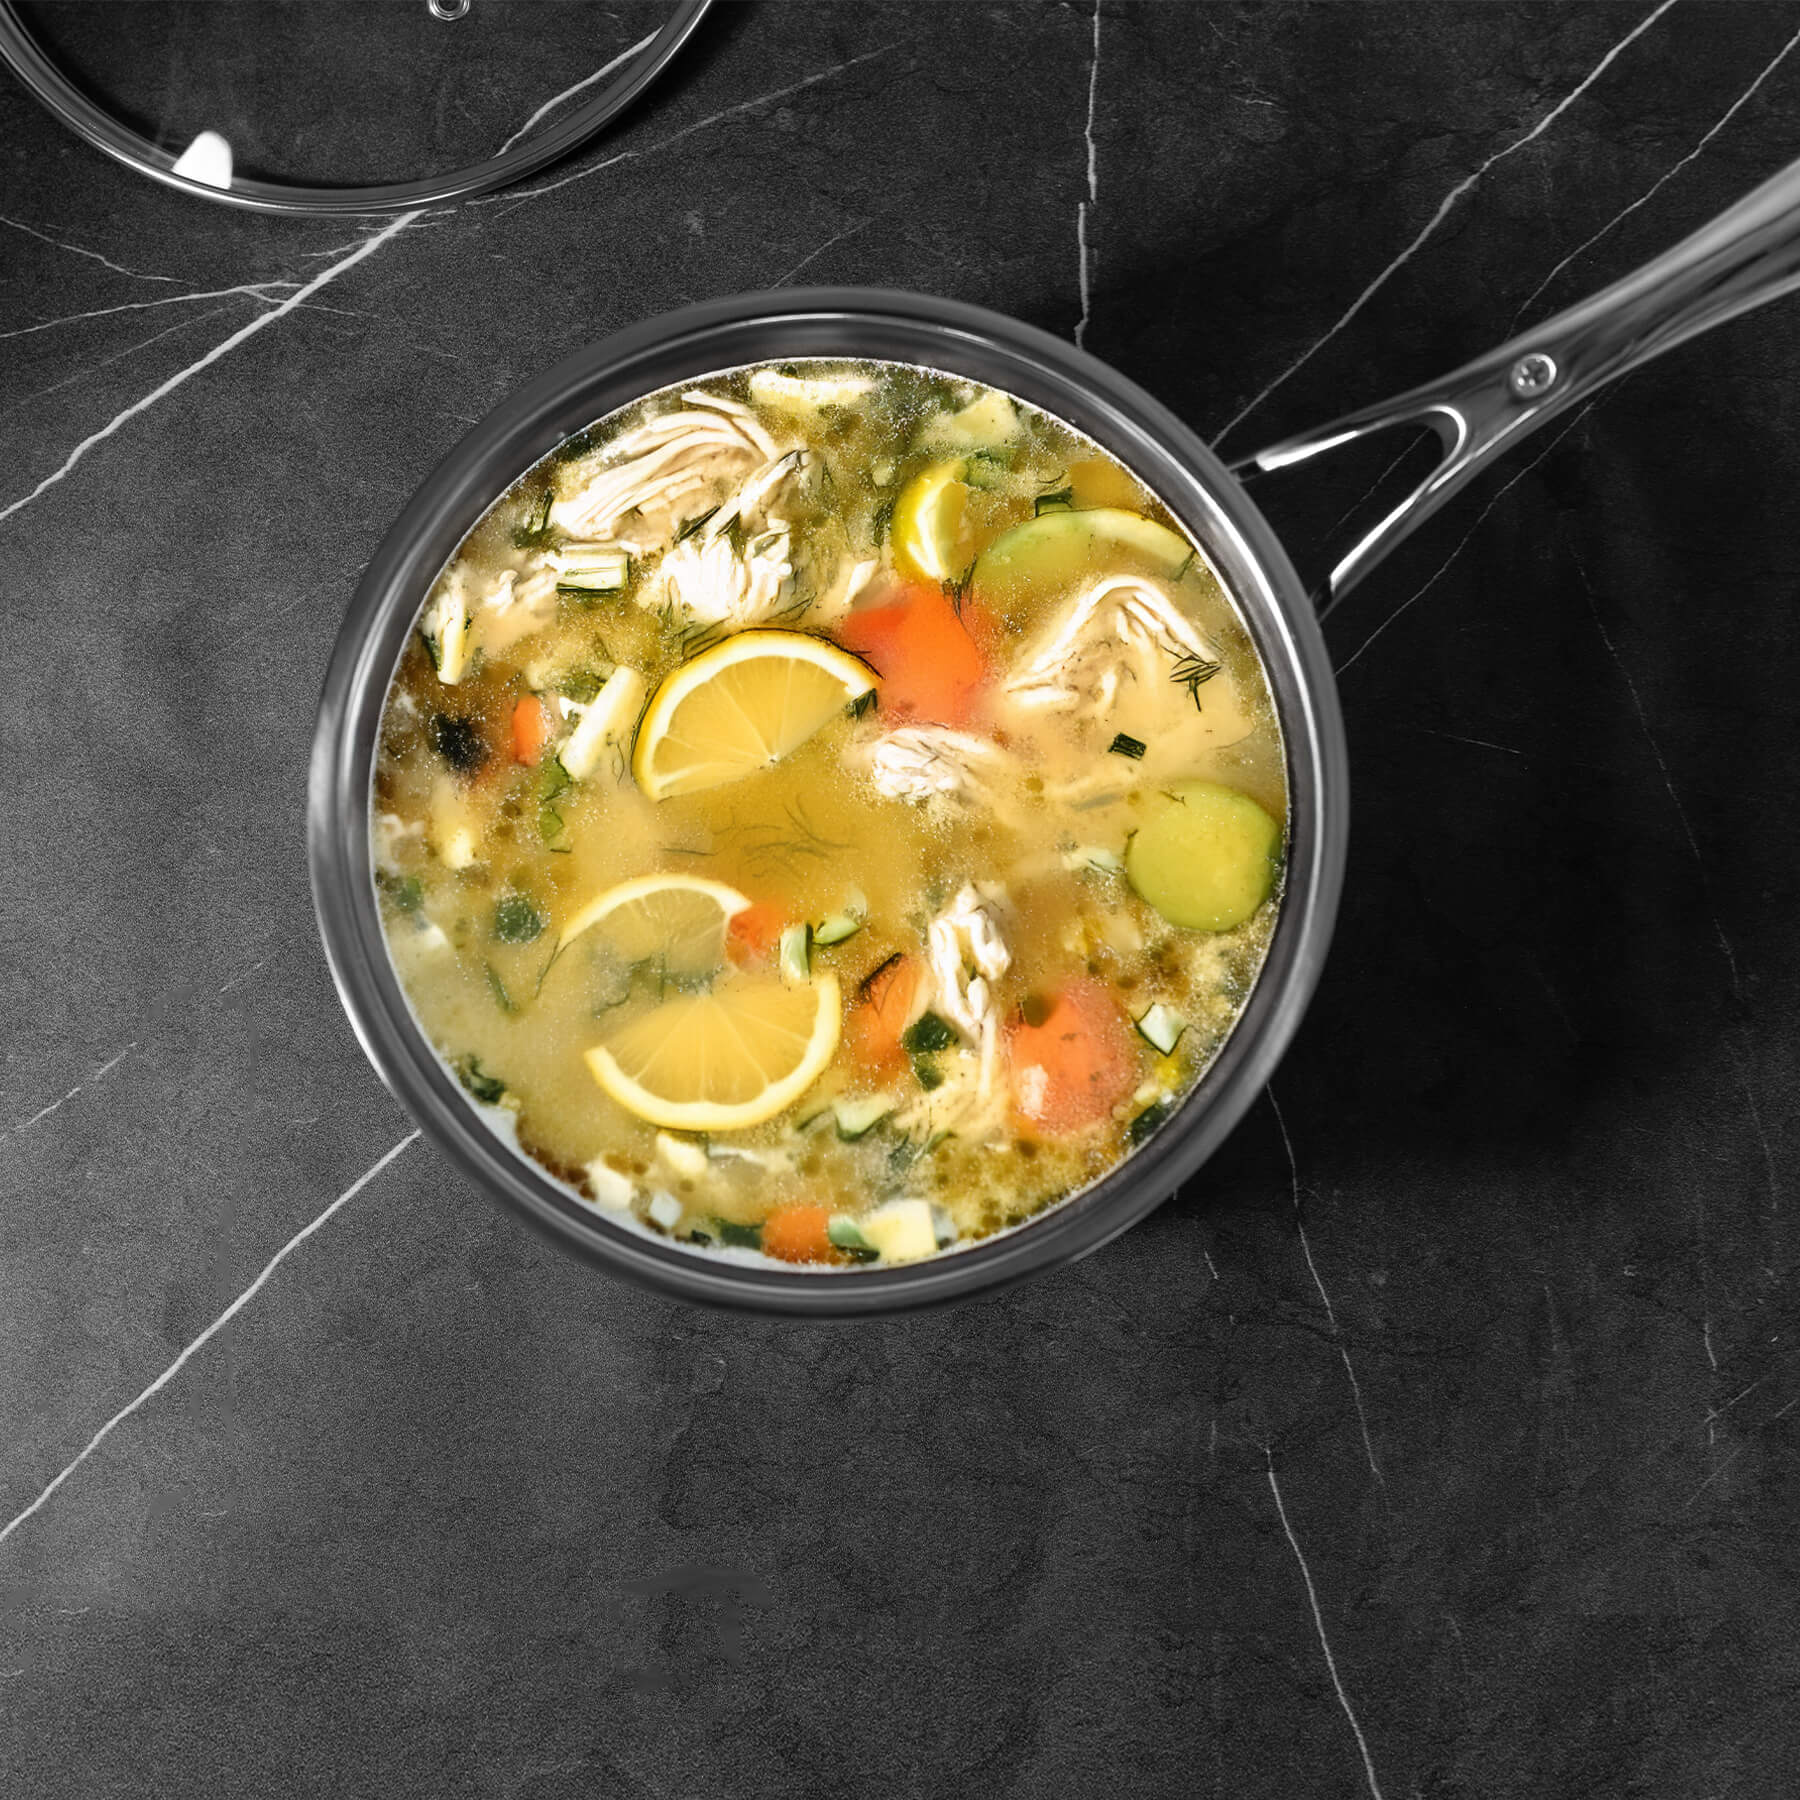 Premium Steel DLX Saucepan with Glass Lid - Induction in use with food inside on a kitchen counter